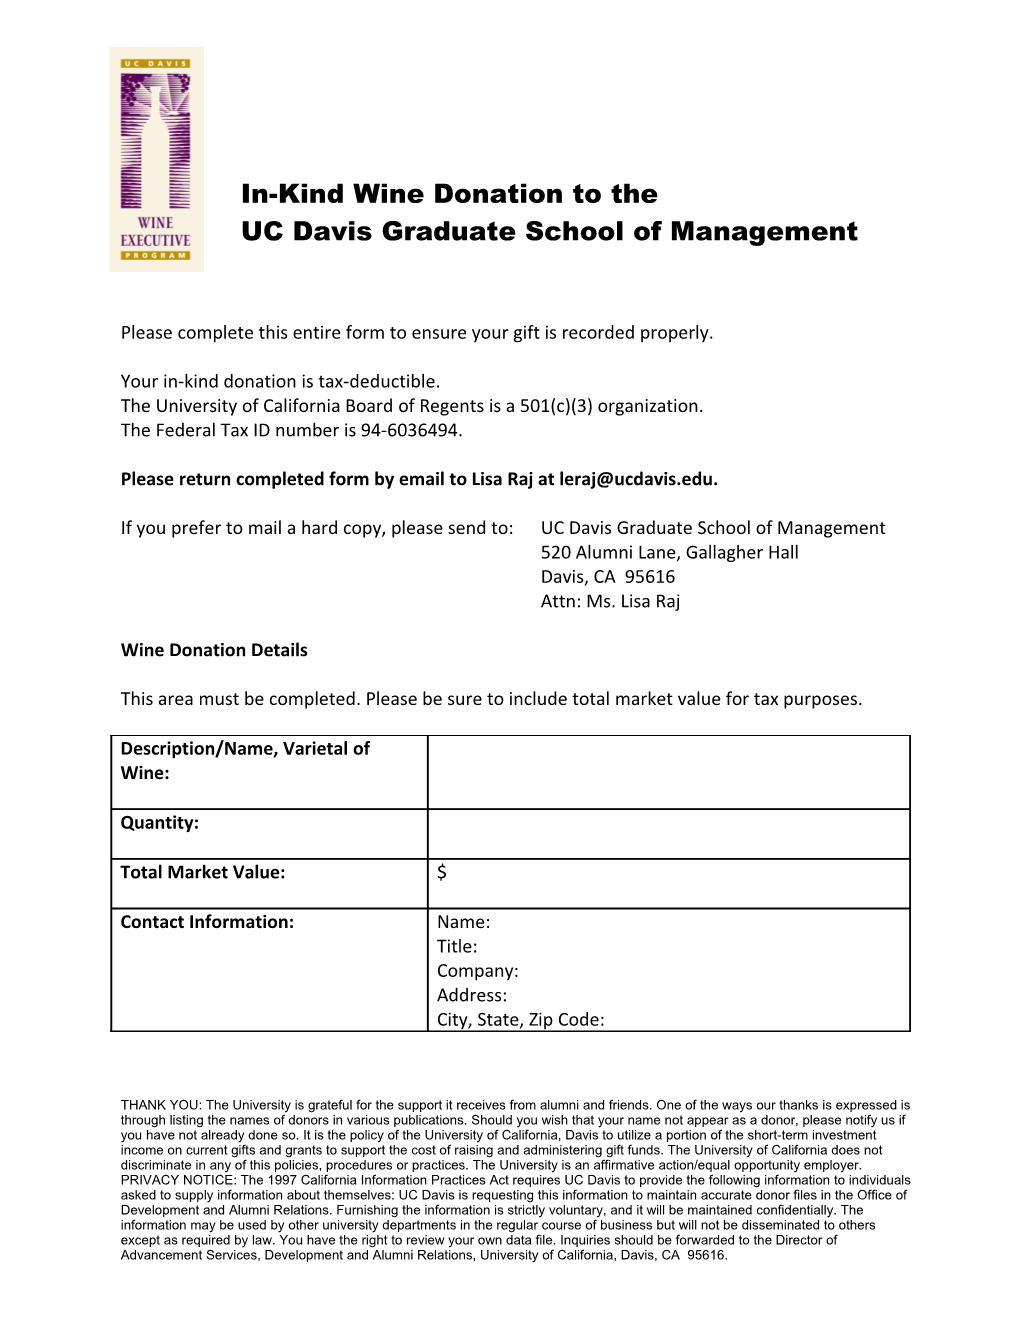 In-Kind Wine Donation to the UC Davis Graduate School of Management